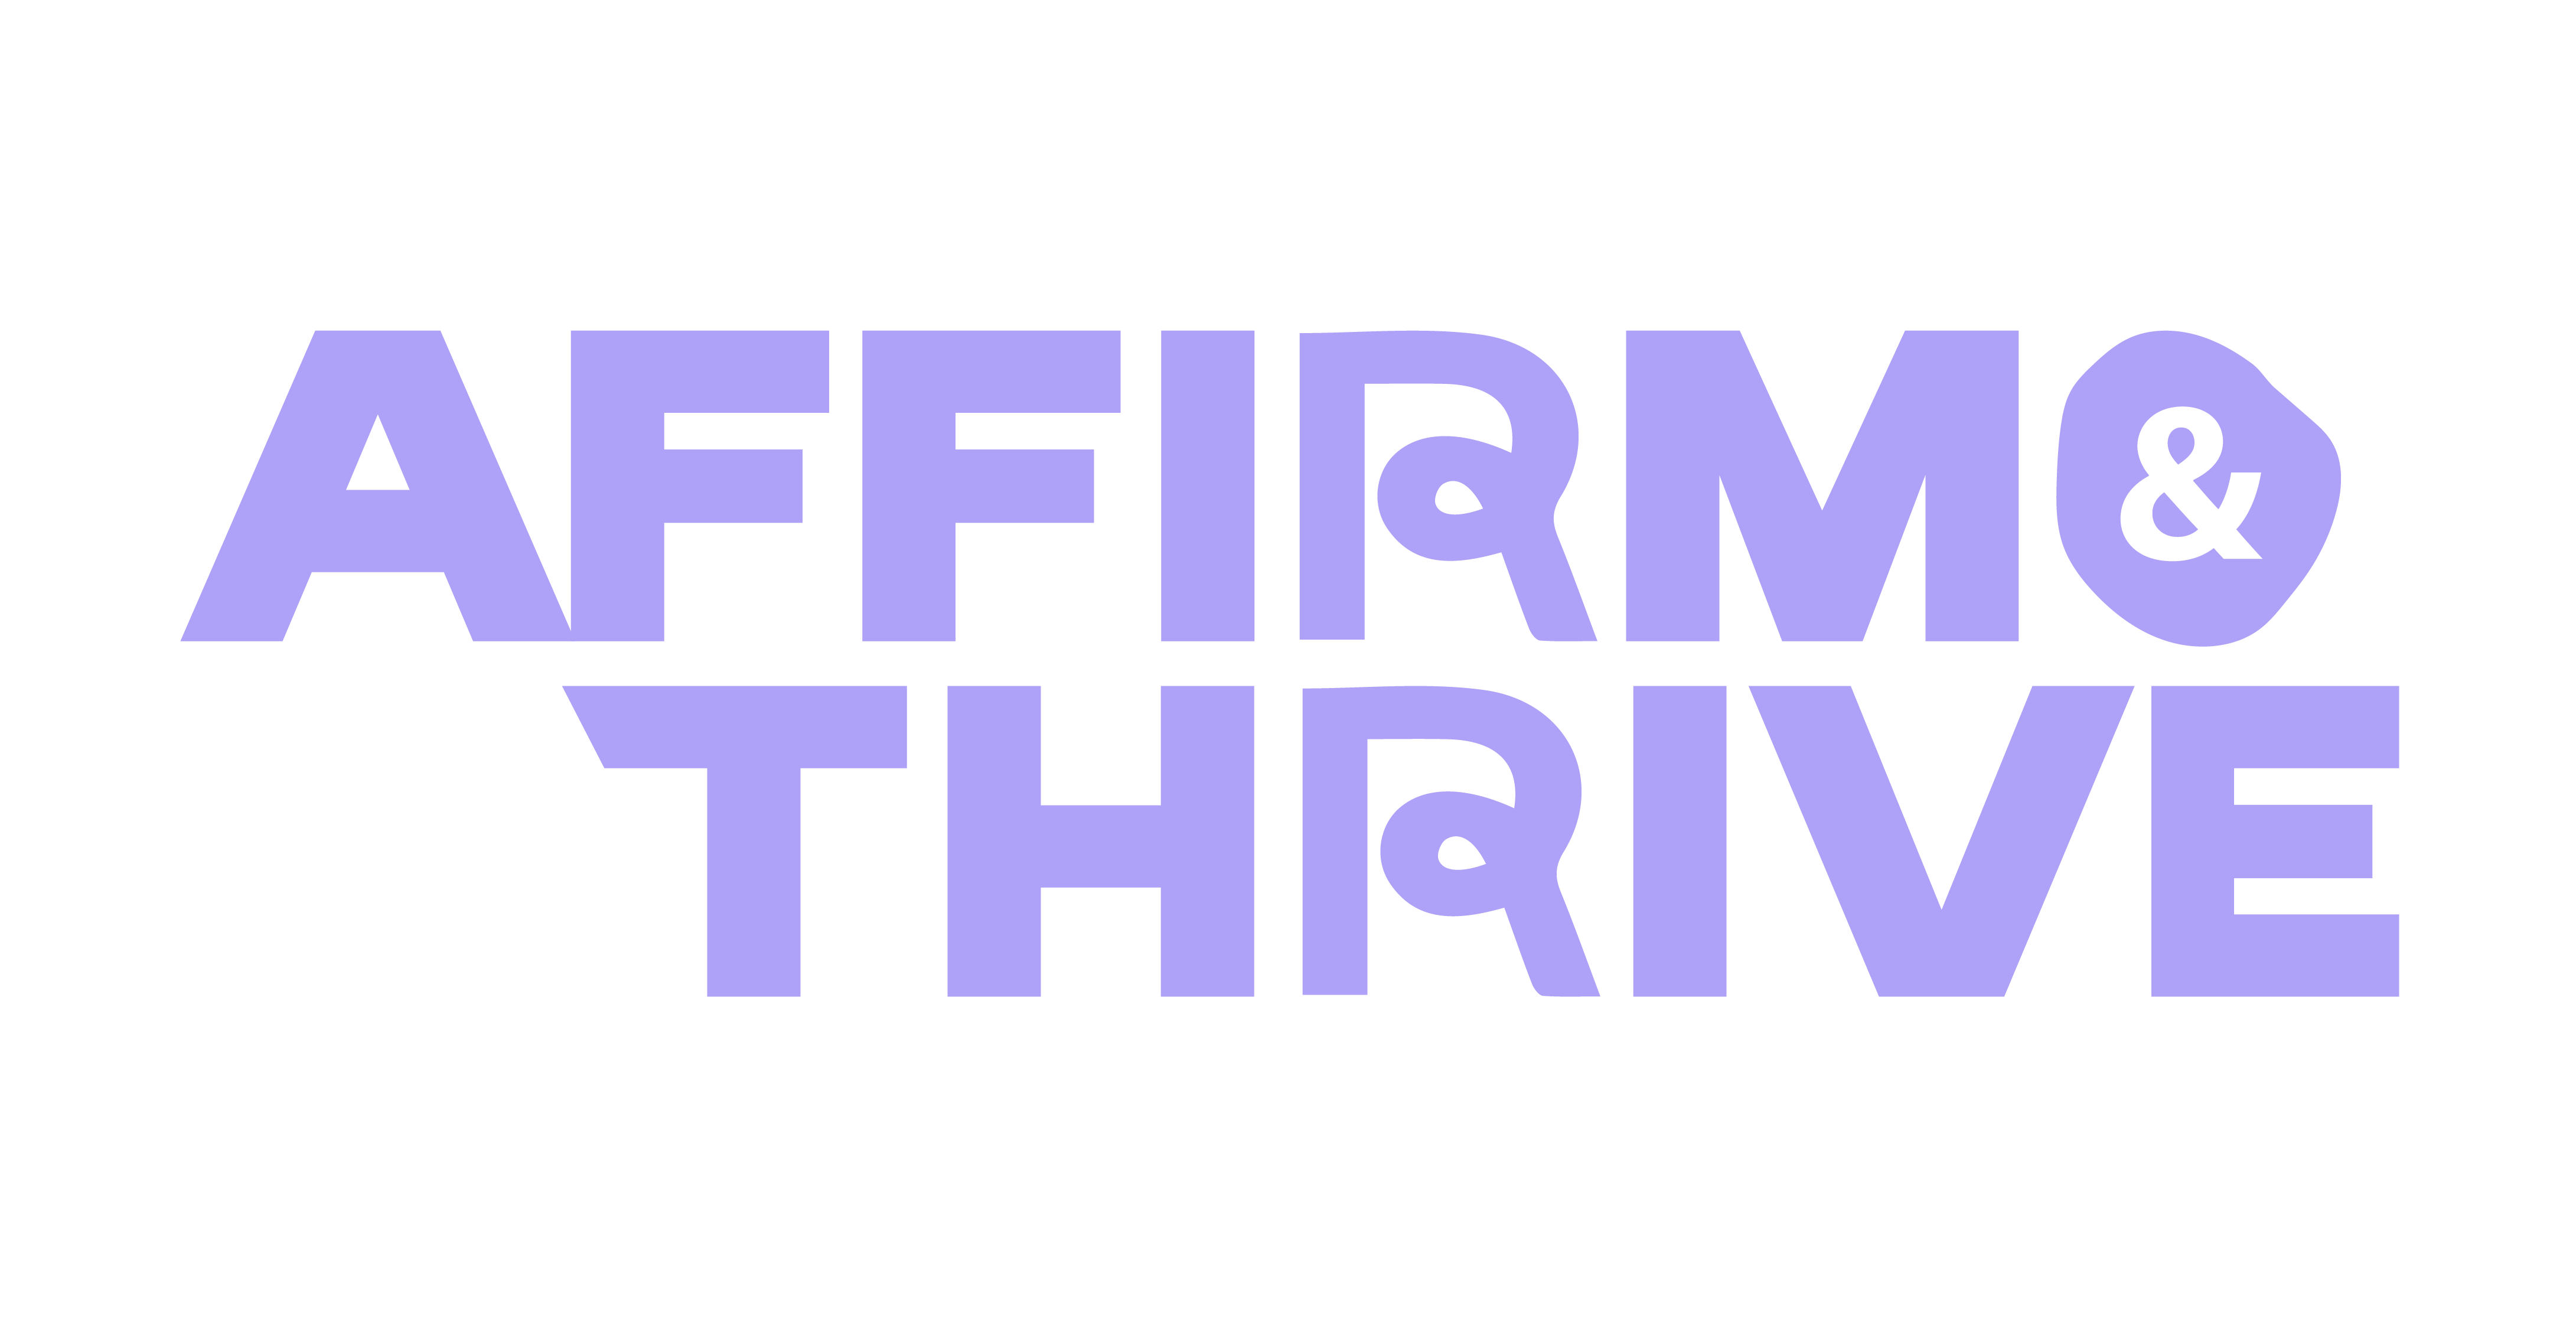 Affirm and Thrive trademark in purple